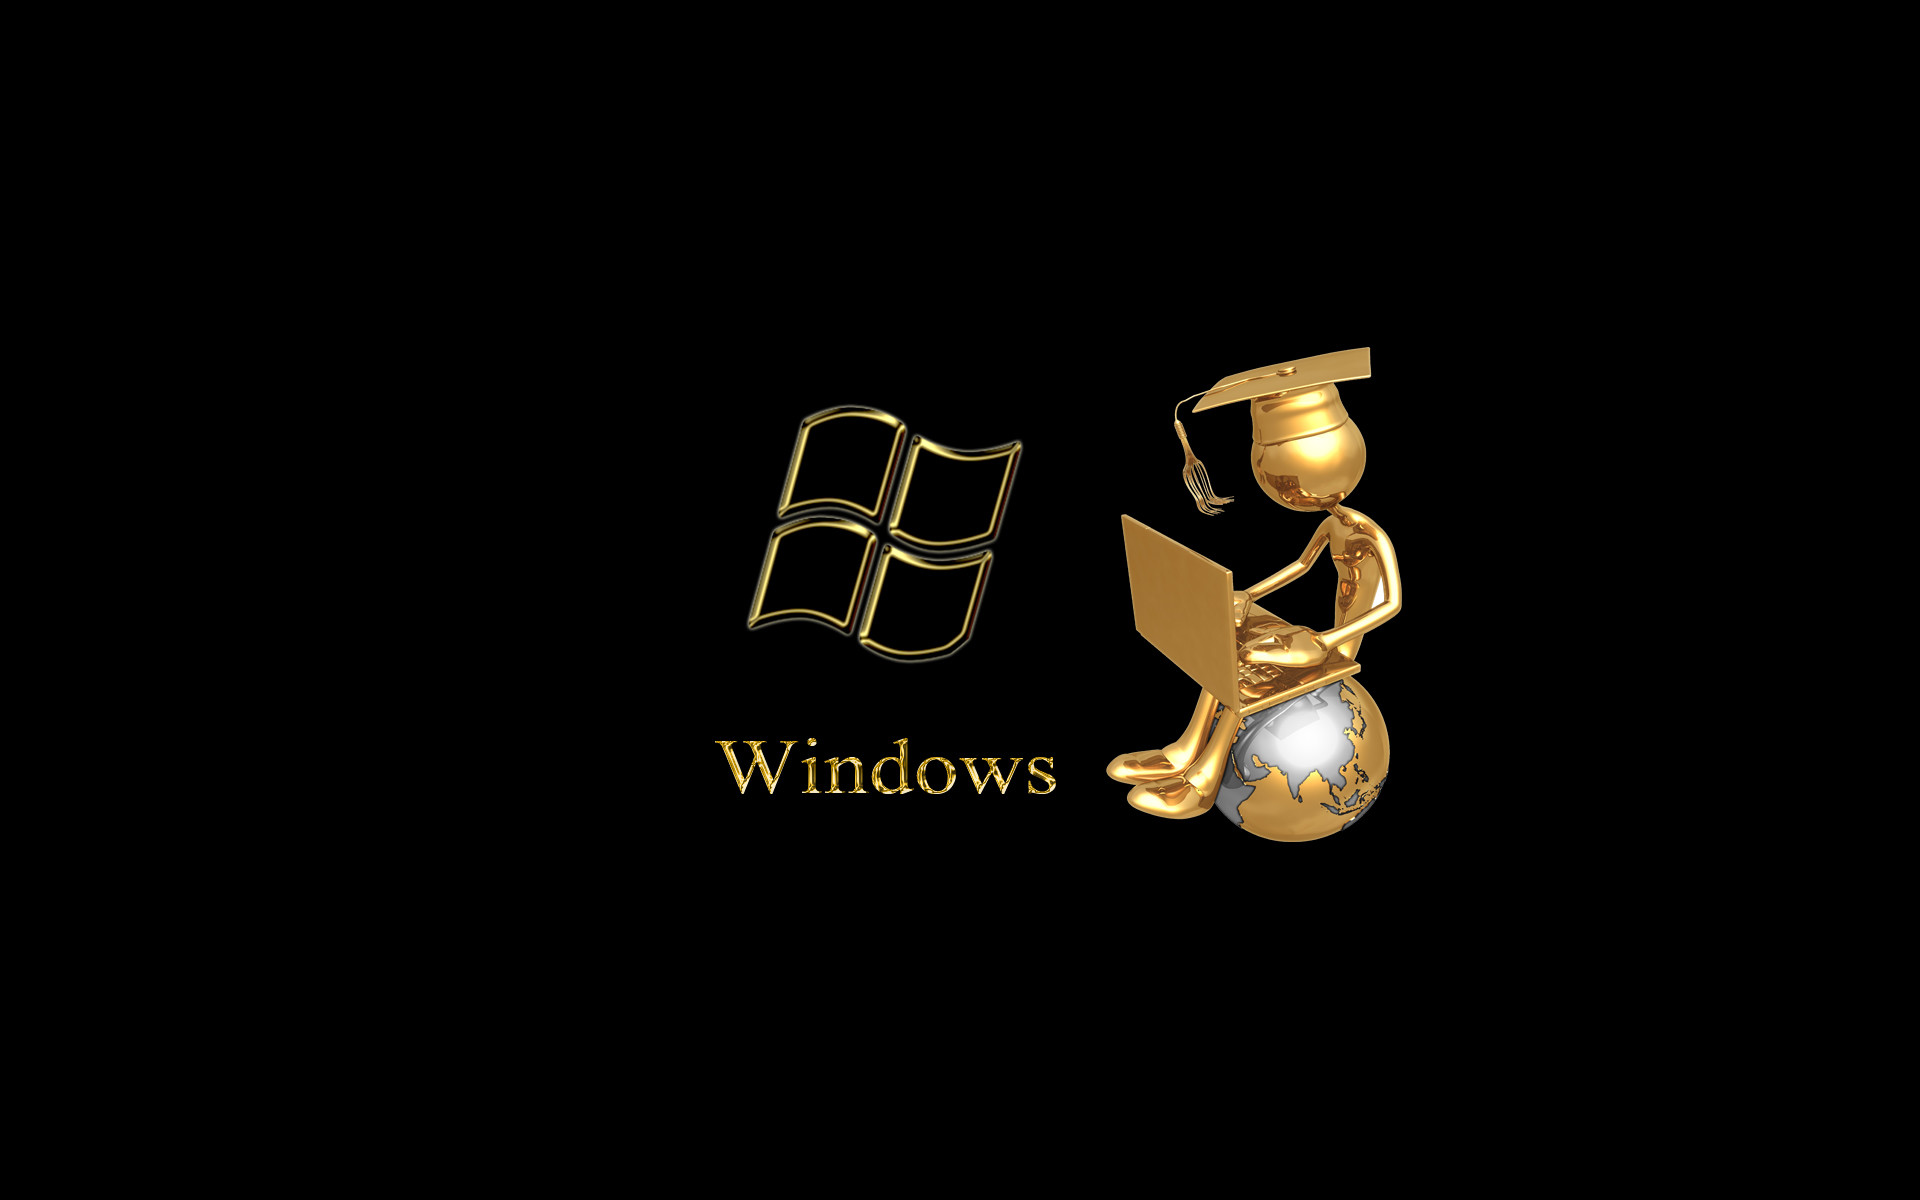 1920x1200 Cool 3D Windows 7 Wallpapers in High Quality, Romy Couronne